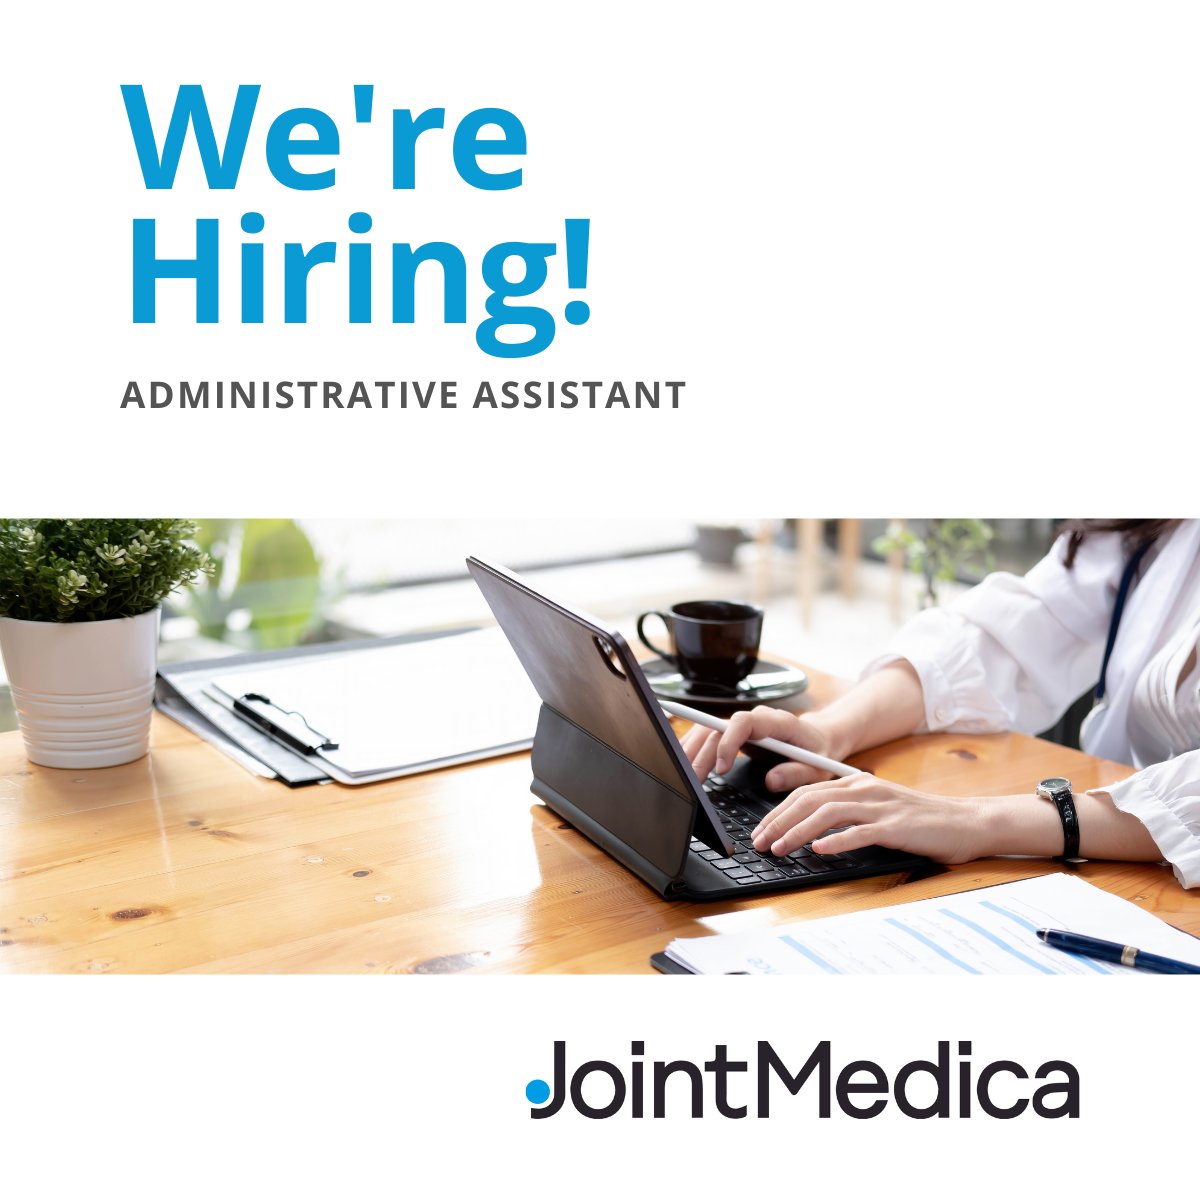 📣 Job Alert! We are seeking a diligent and organised Part-Time Administrative Assistant to join our growing team at our head office in Hallow, Worcestershire. The administrative assistant will play a pivotal role supporting the Senior Administrator, by undertaking general